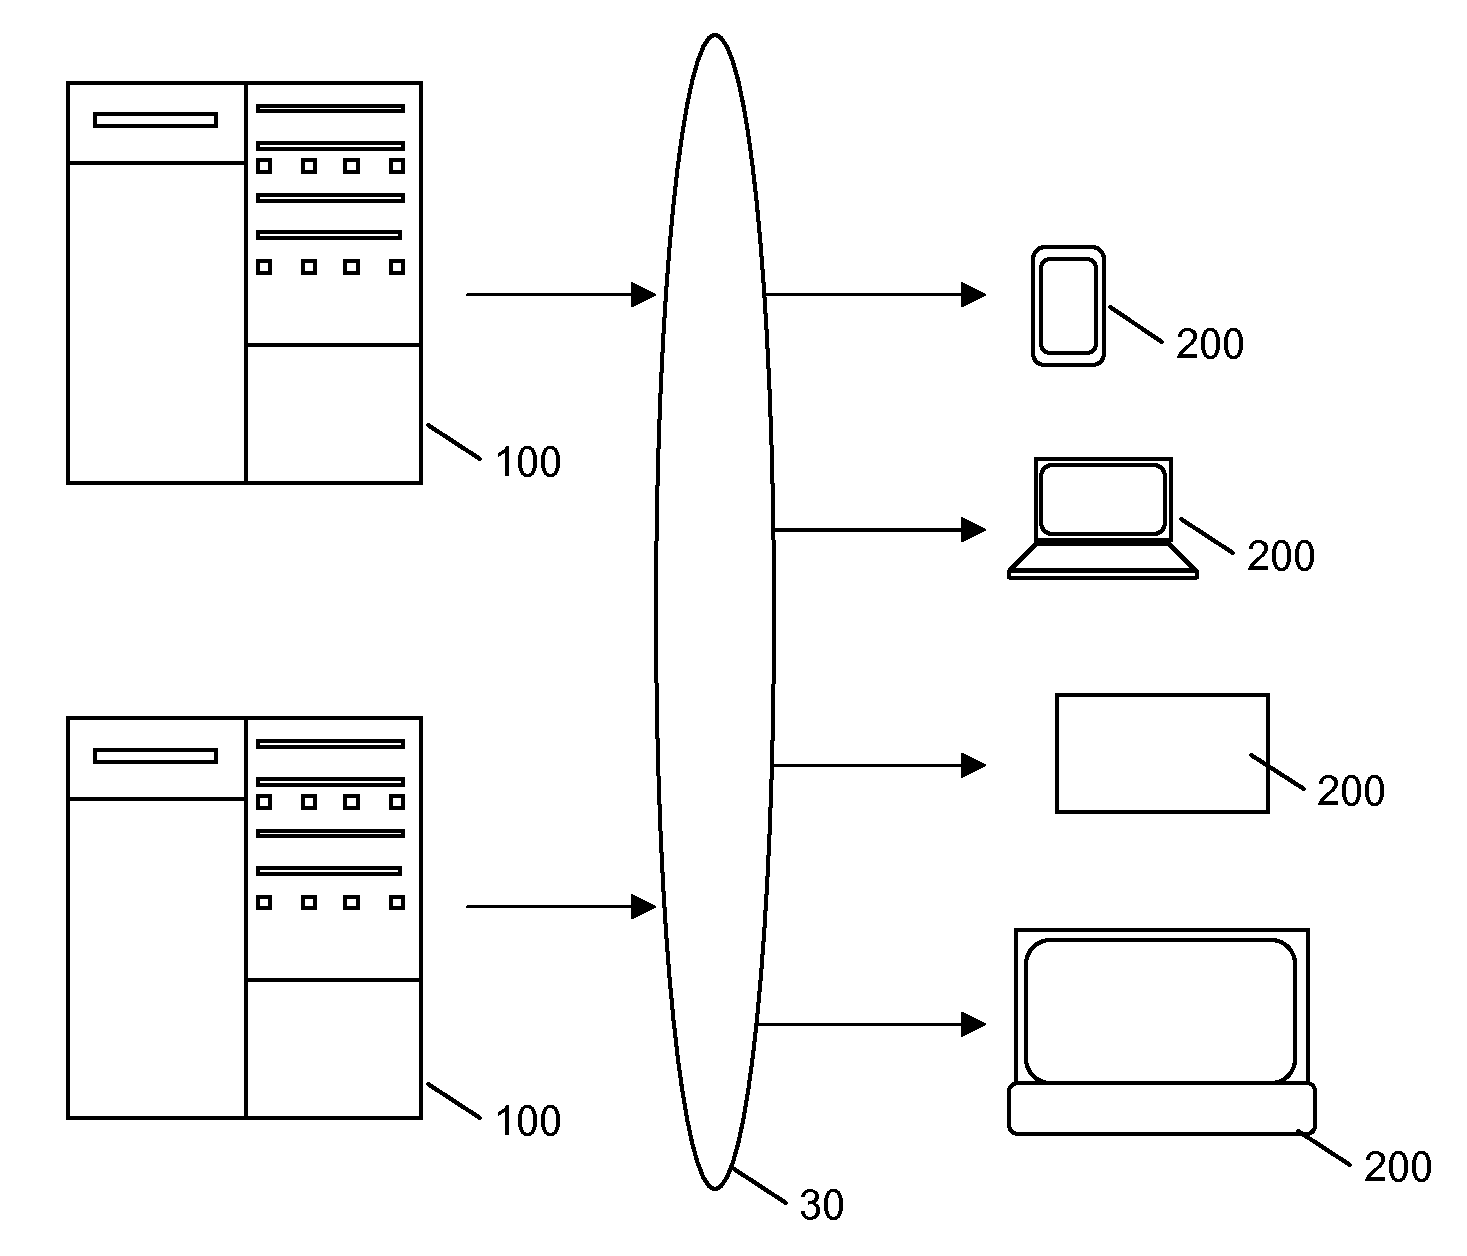 Multimedia content delivery system